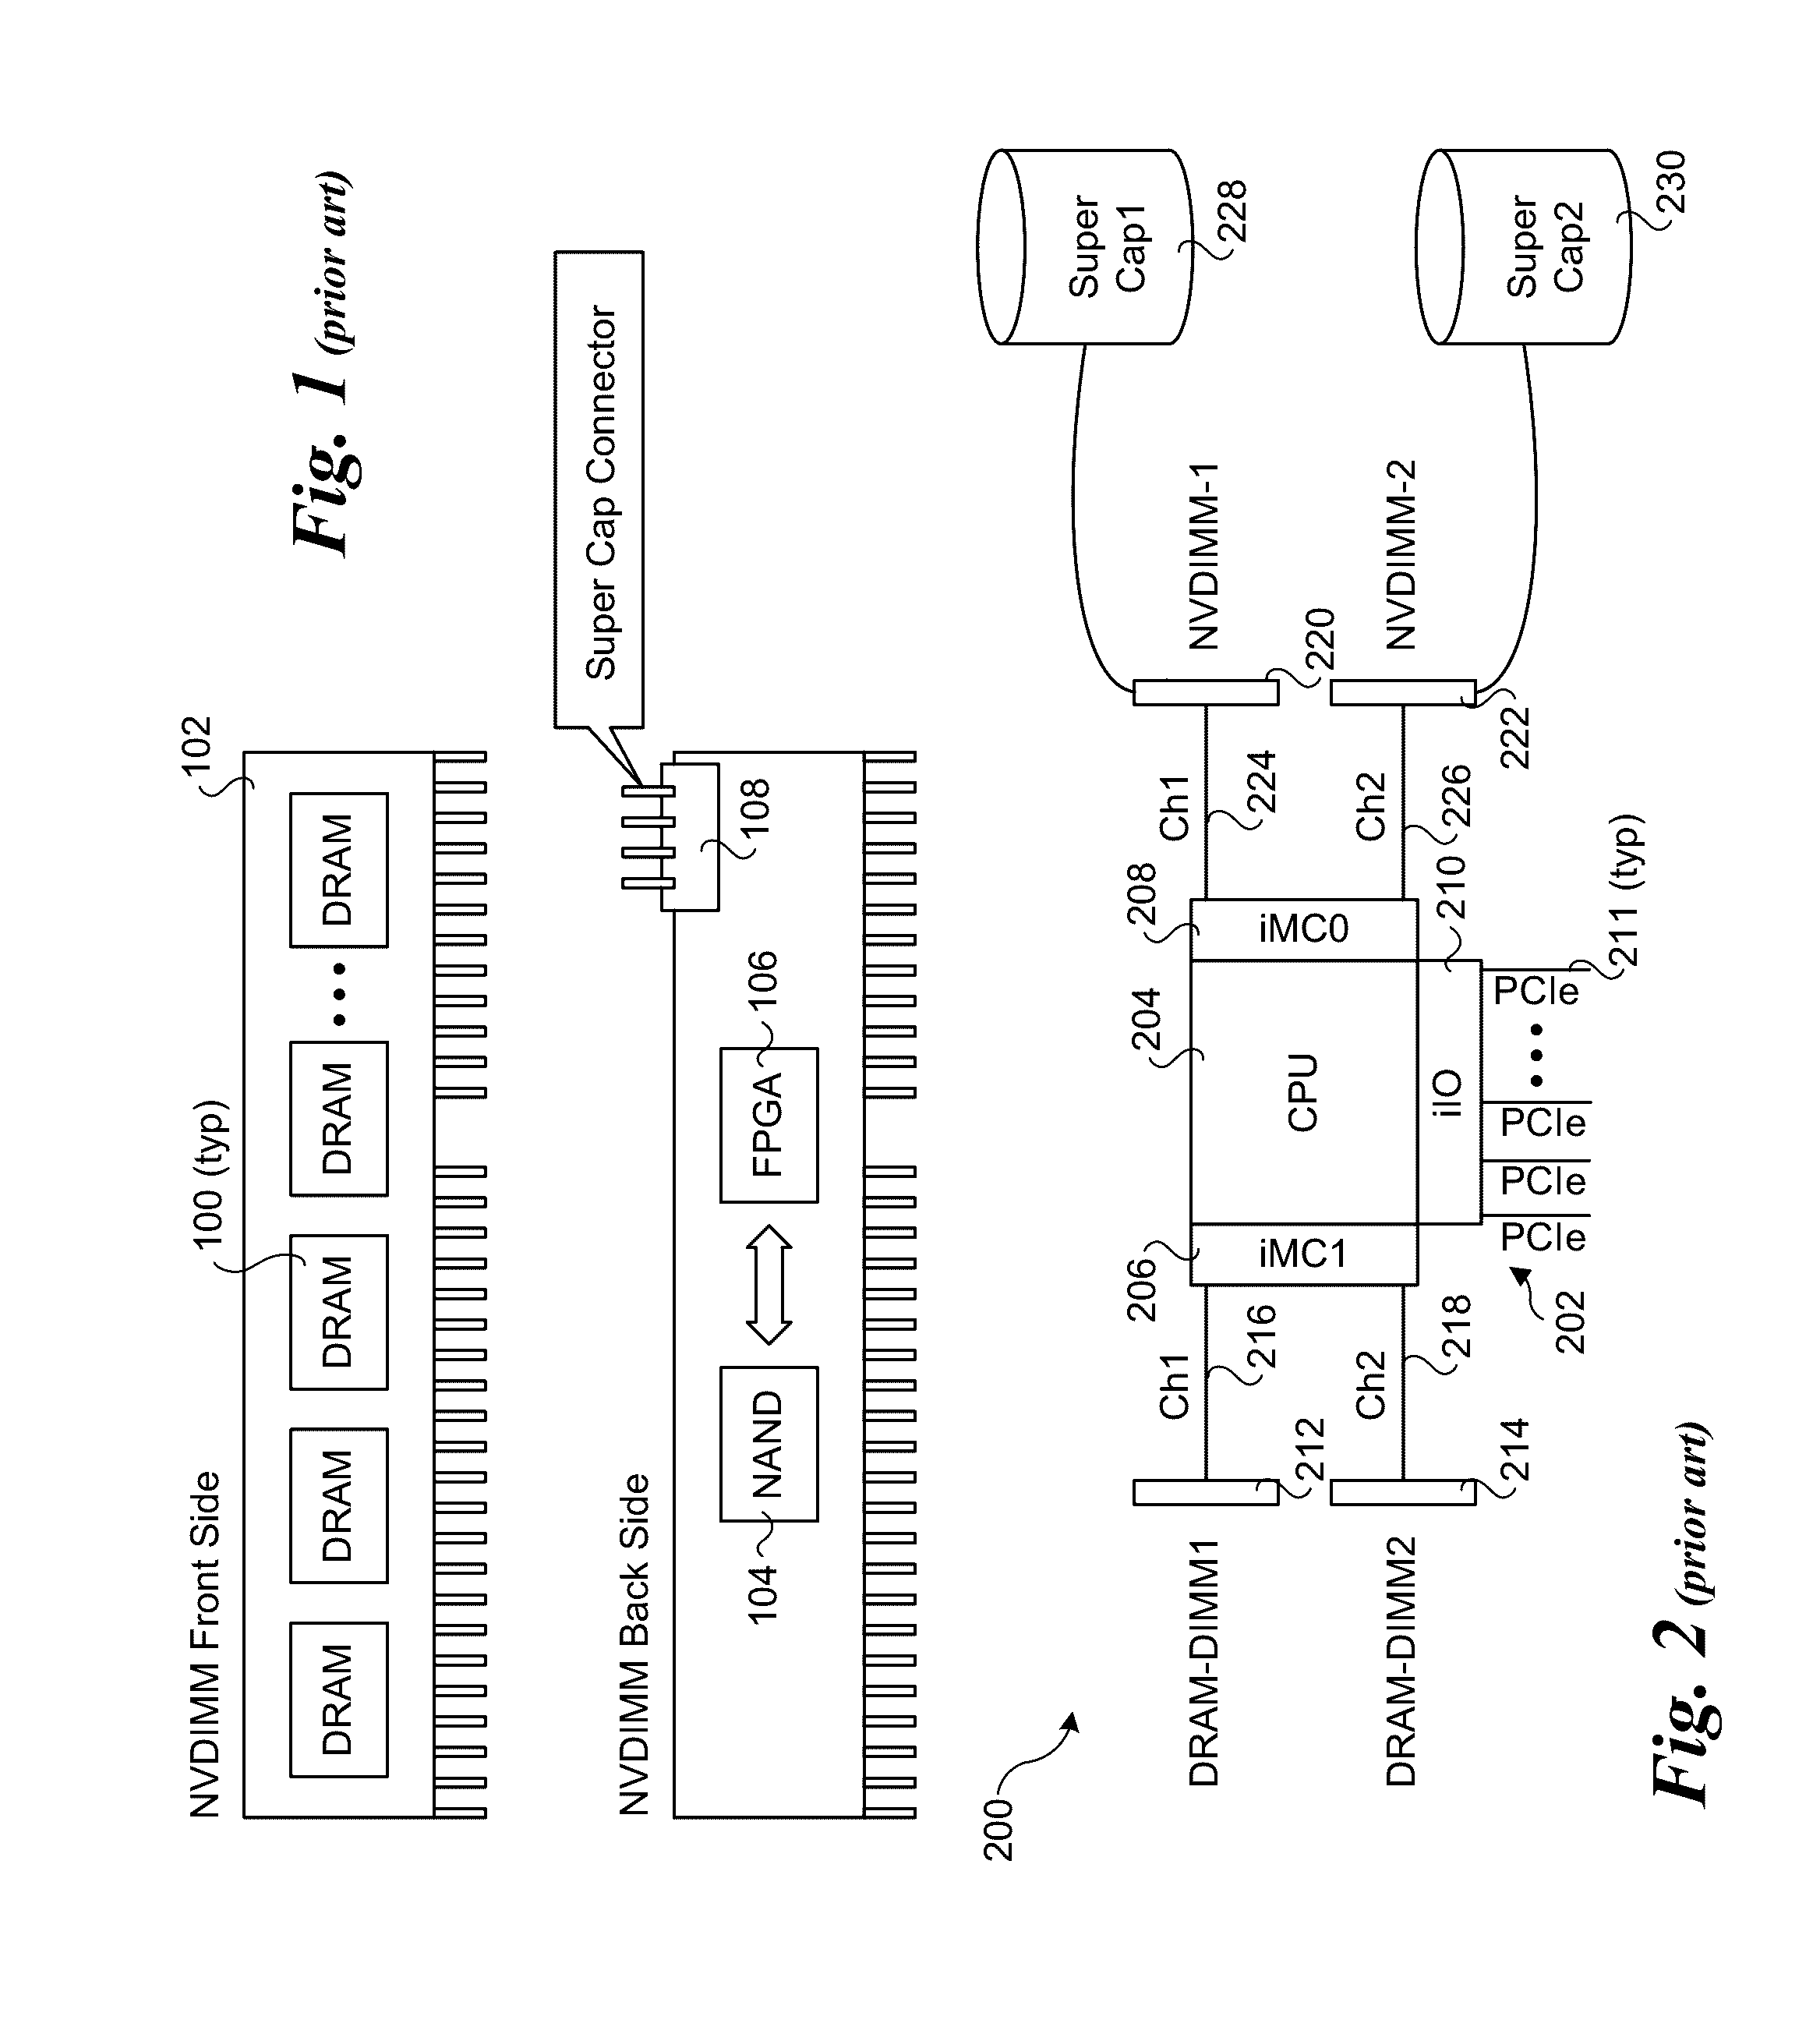 Processor and platform assisted nvdimm solution using standard dram and consolidated storage